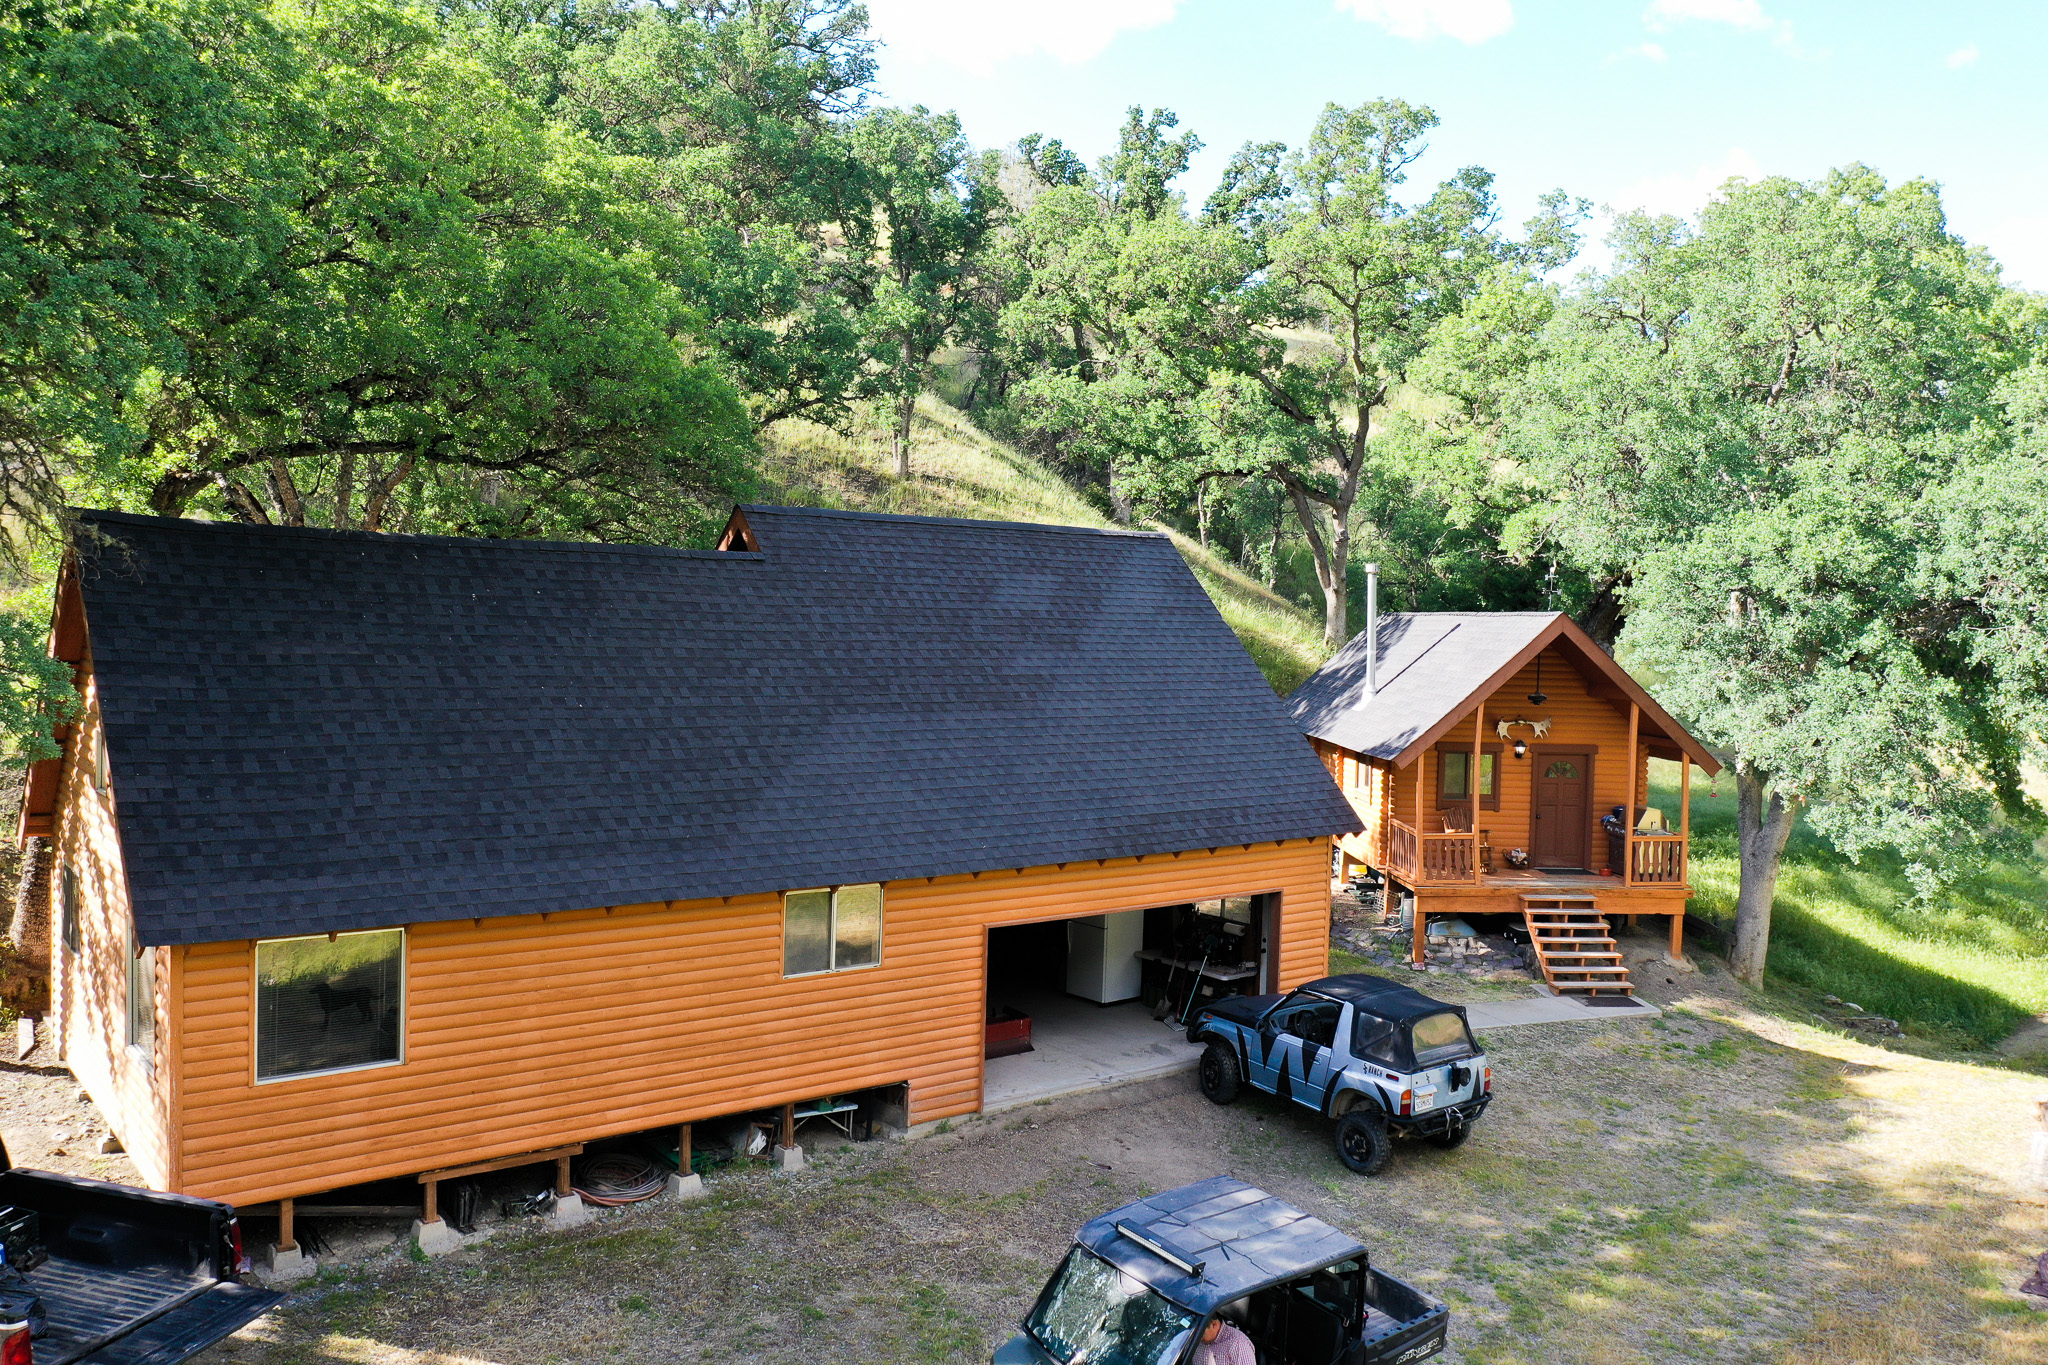 Interior pictures of cabins located on Clearlake Oaks property